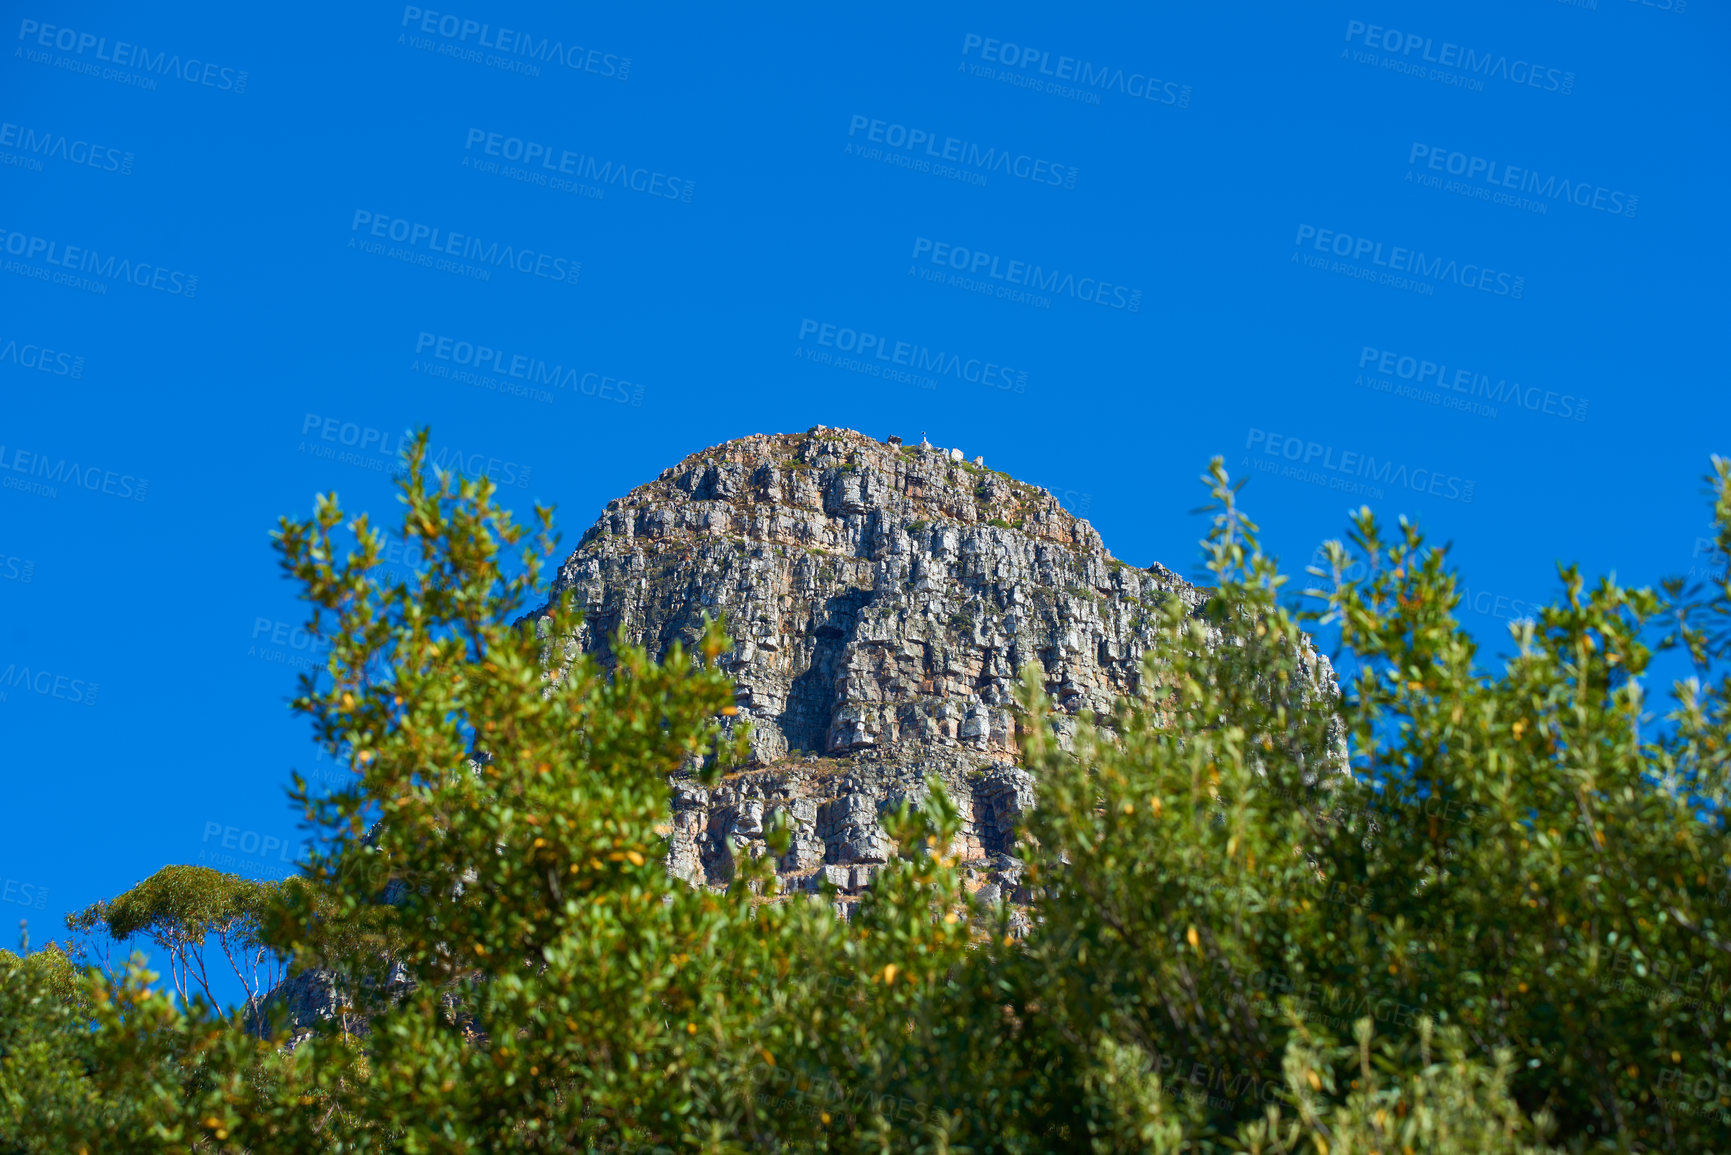 Buy stock photo Panorama of Lions Head in Table Mountain National Park, Cape Town, South Africa with copy space. Beautiful landscape view of a peak in a blue sky on a summer day with lush green plants or trees